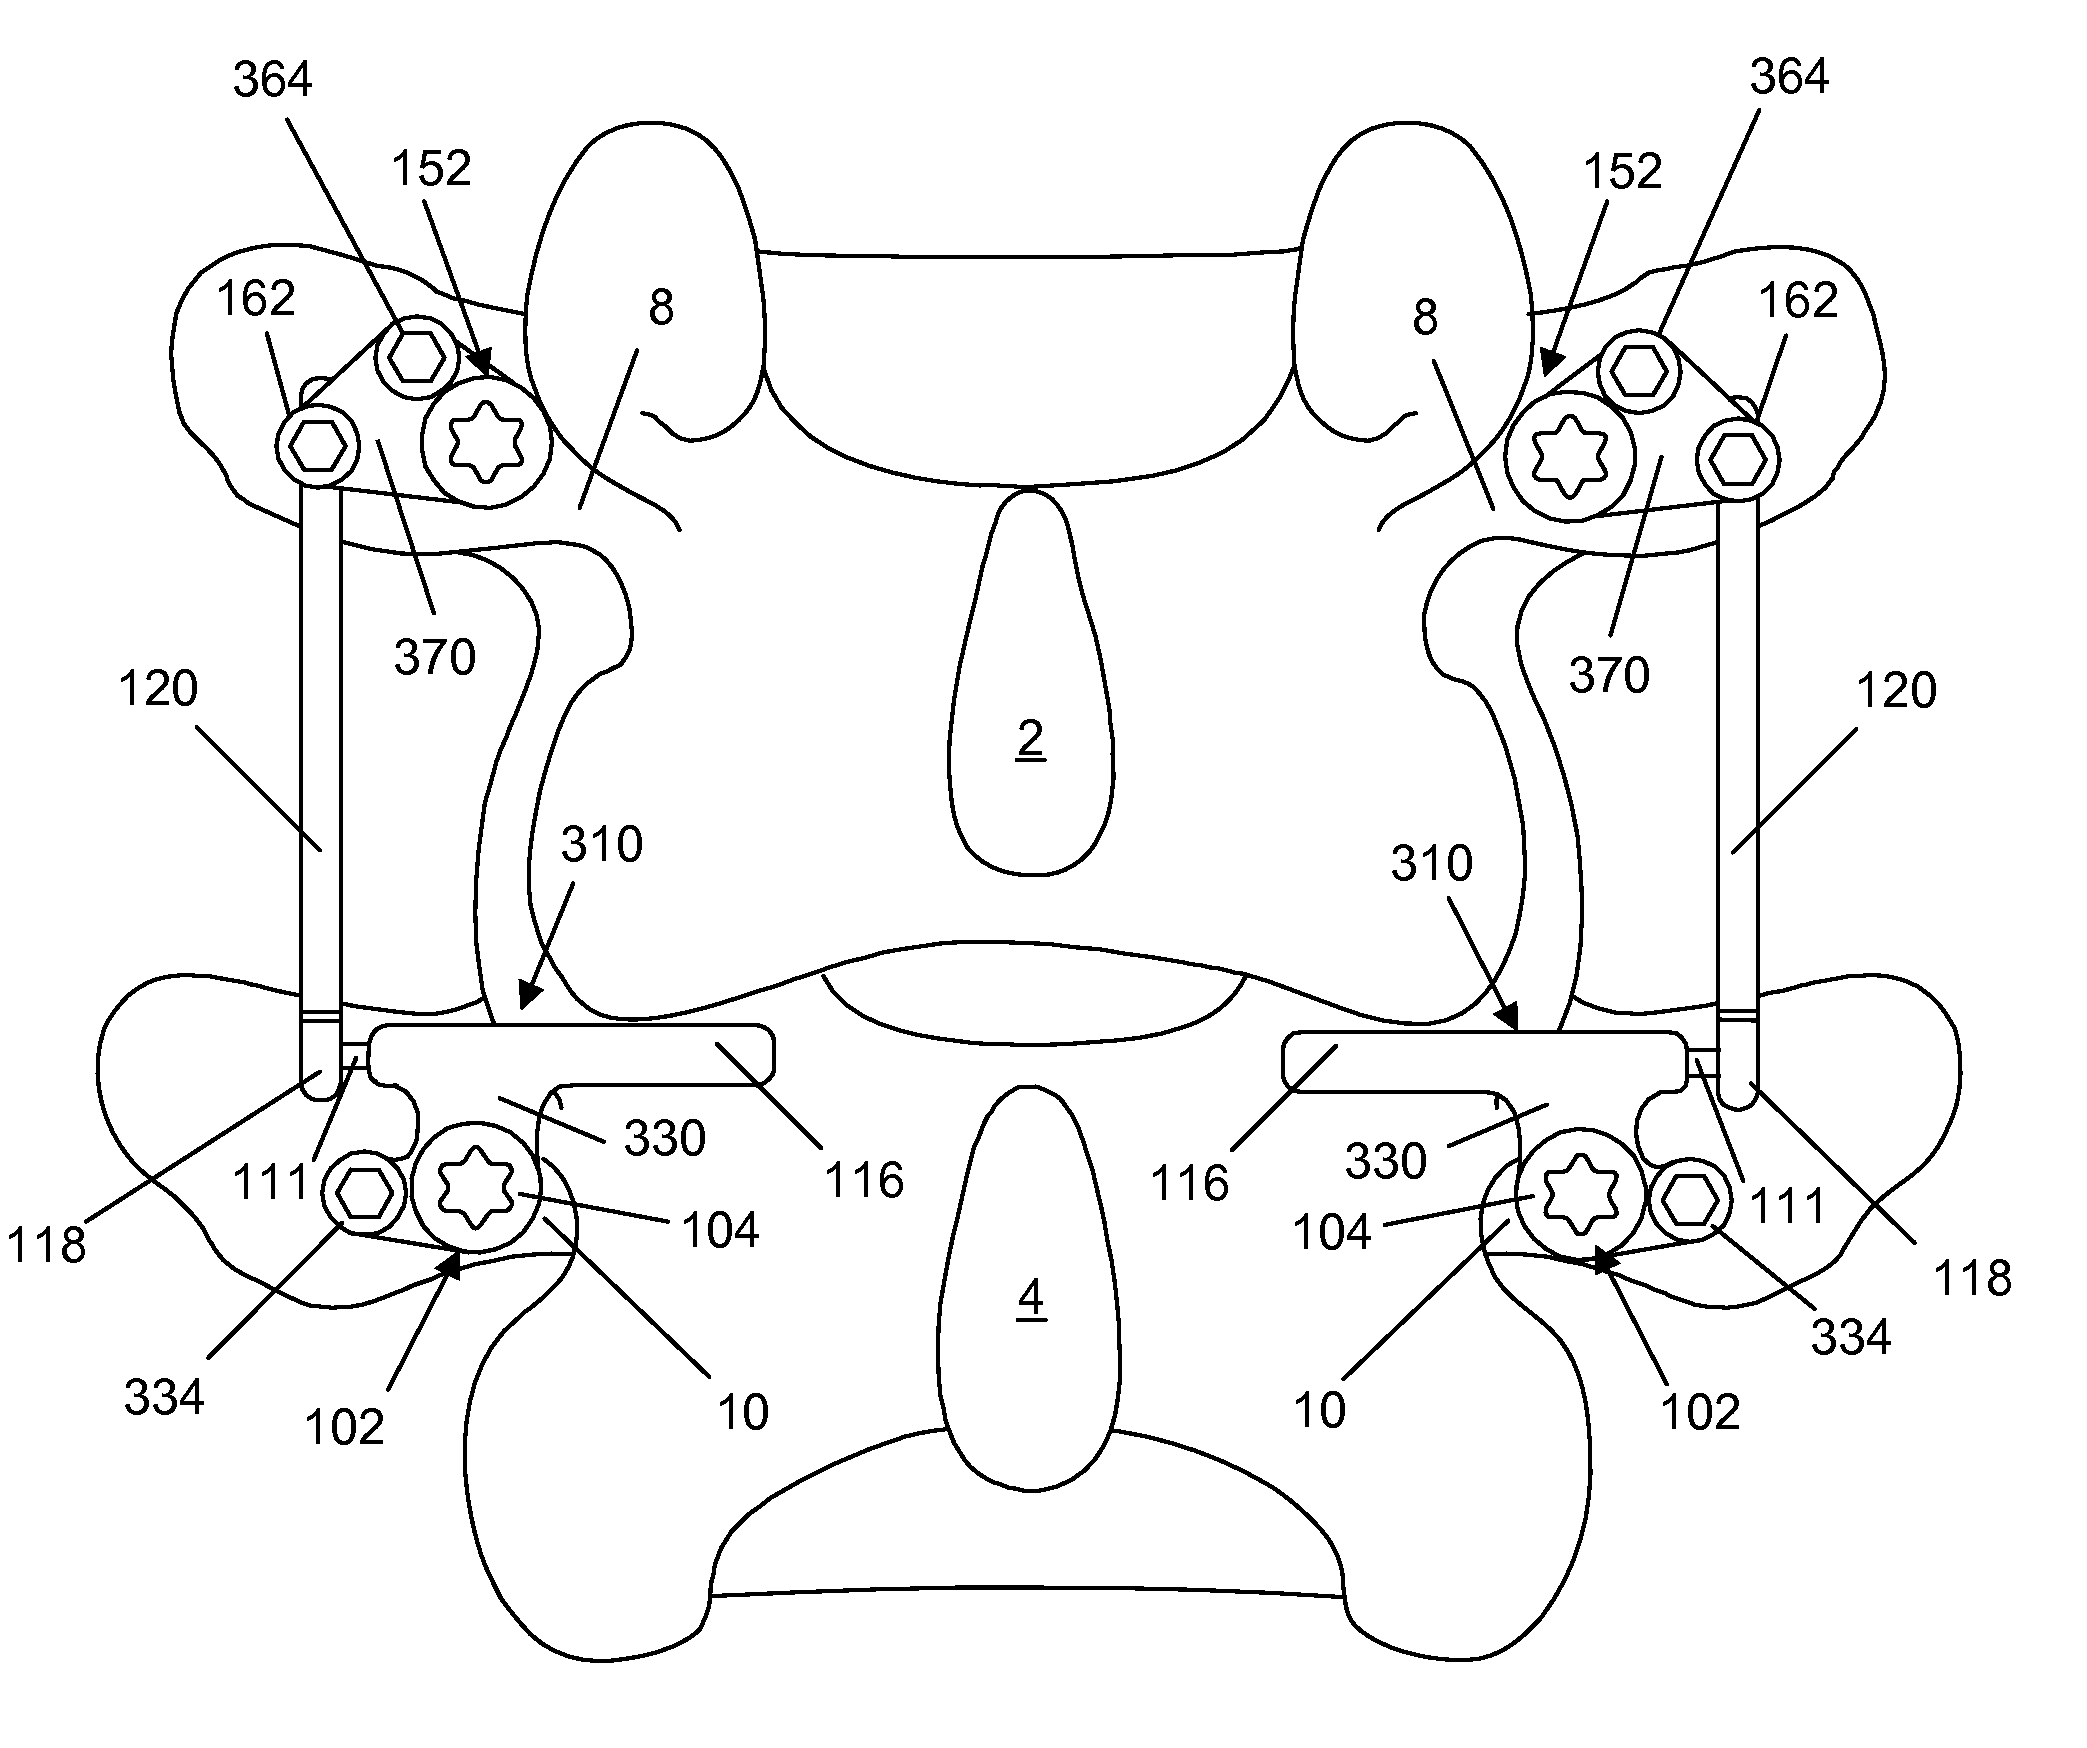 Spine implant with a dual deflection rod system including a deflection limiting sheild associated with a bone screw and method